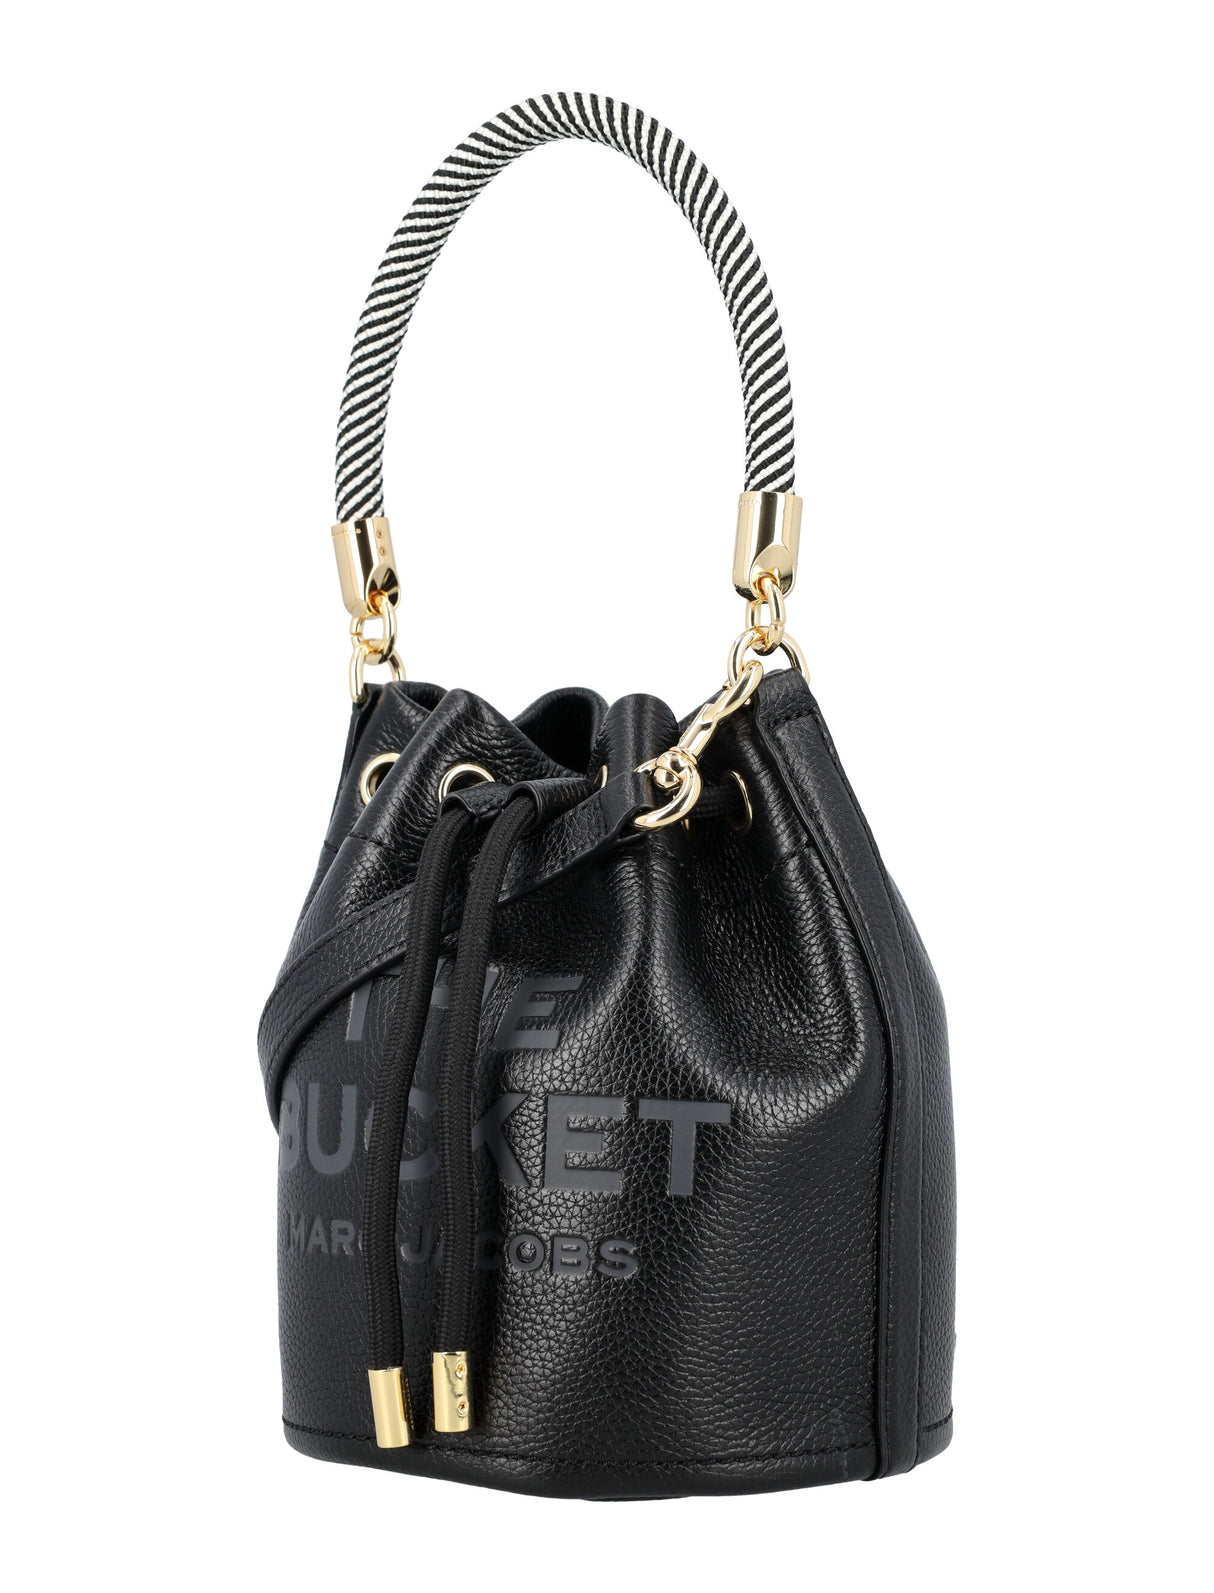 Grain Leather Women's Bucket Handbag by Marc Jacobs - SS24 Collection